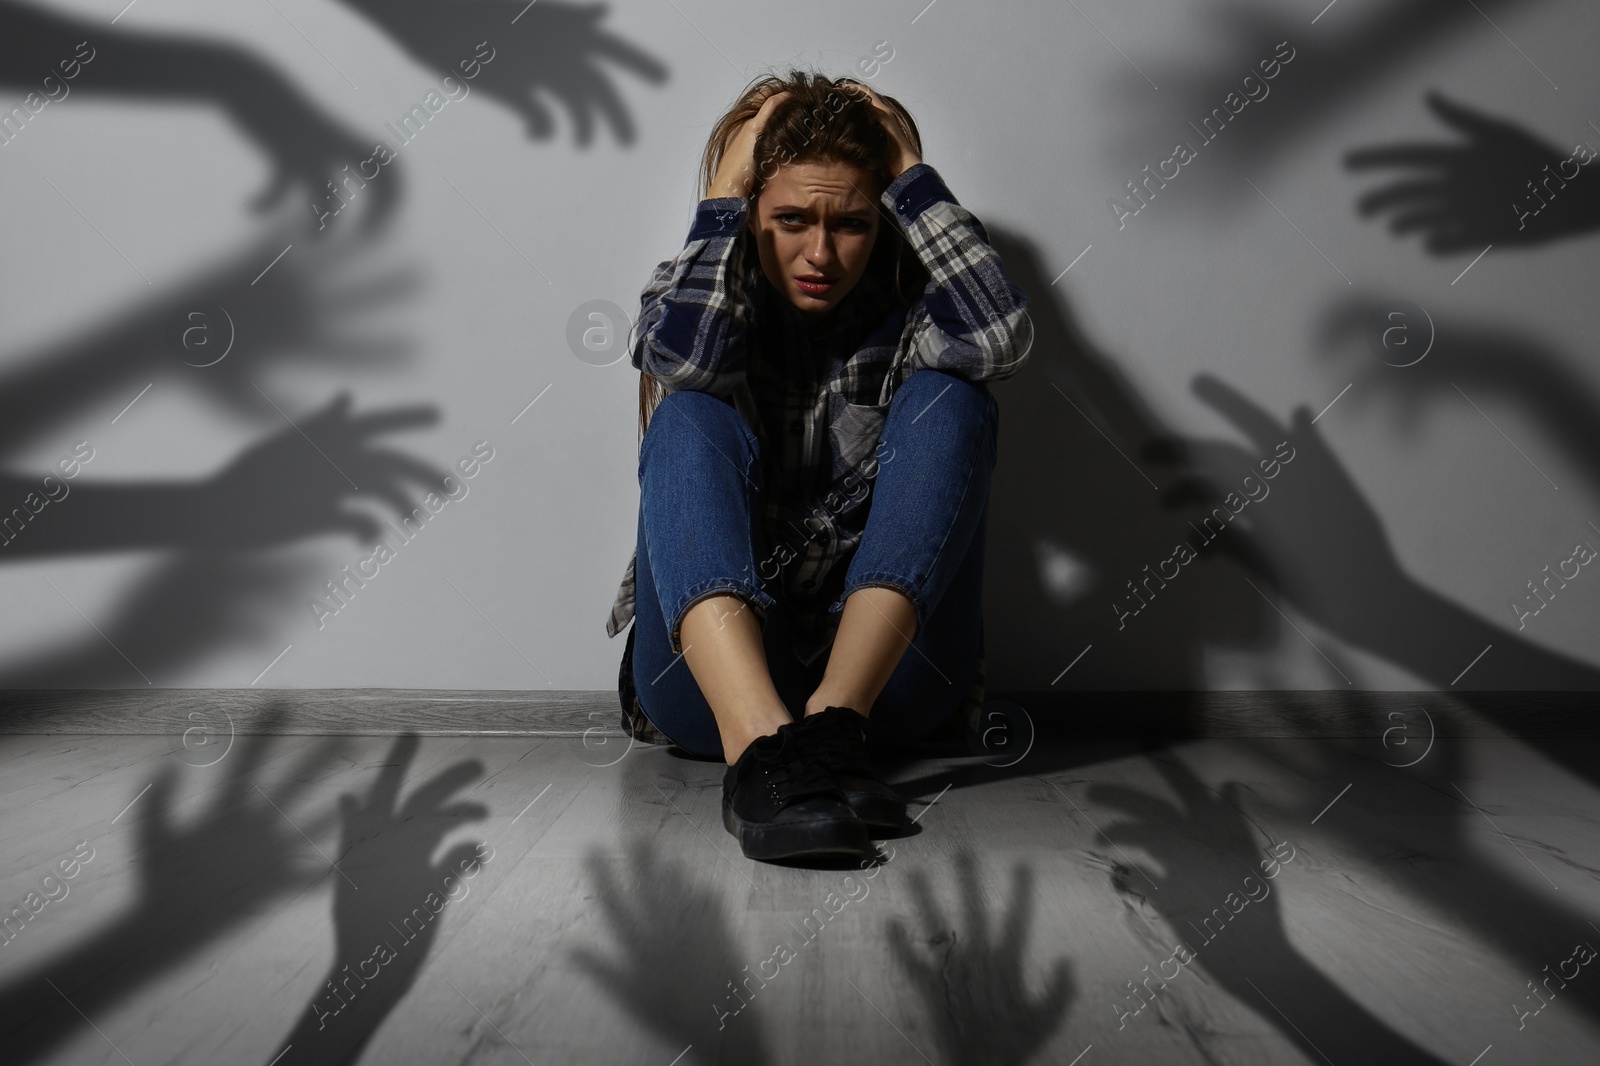 Image of Paranoid delusion. Scared woman sitting near wall. Shadows of hands reaching for her symbolizing fear and anxiety